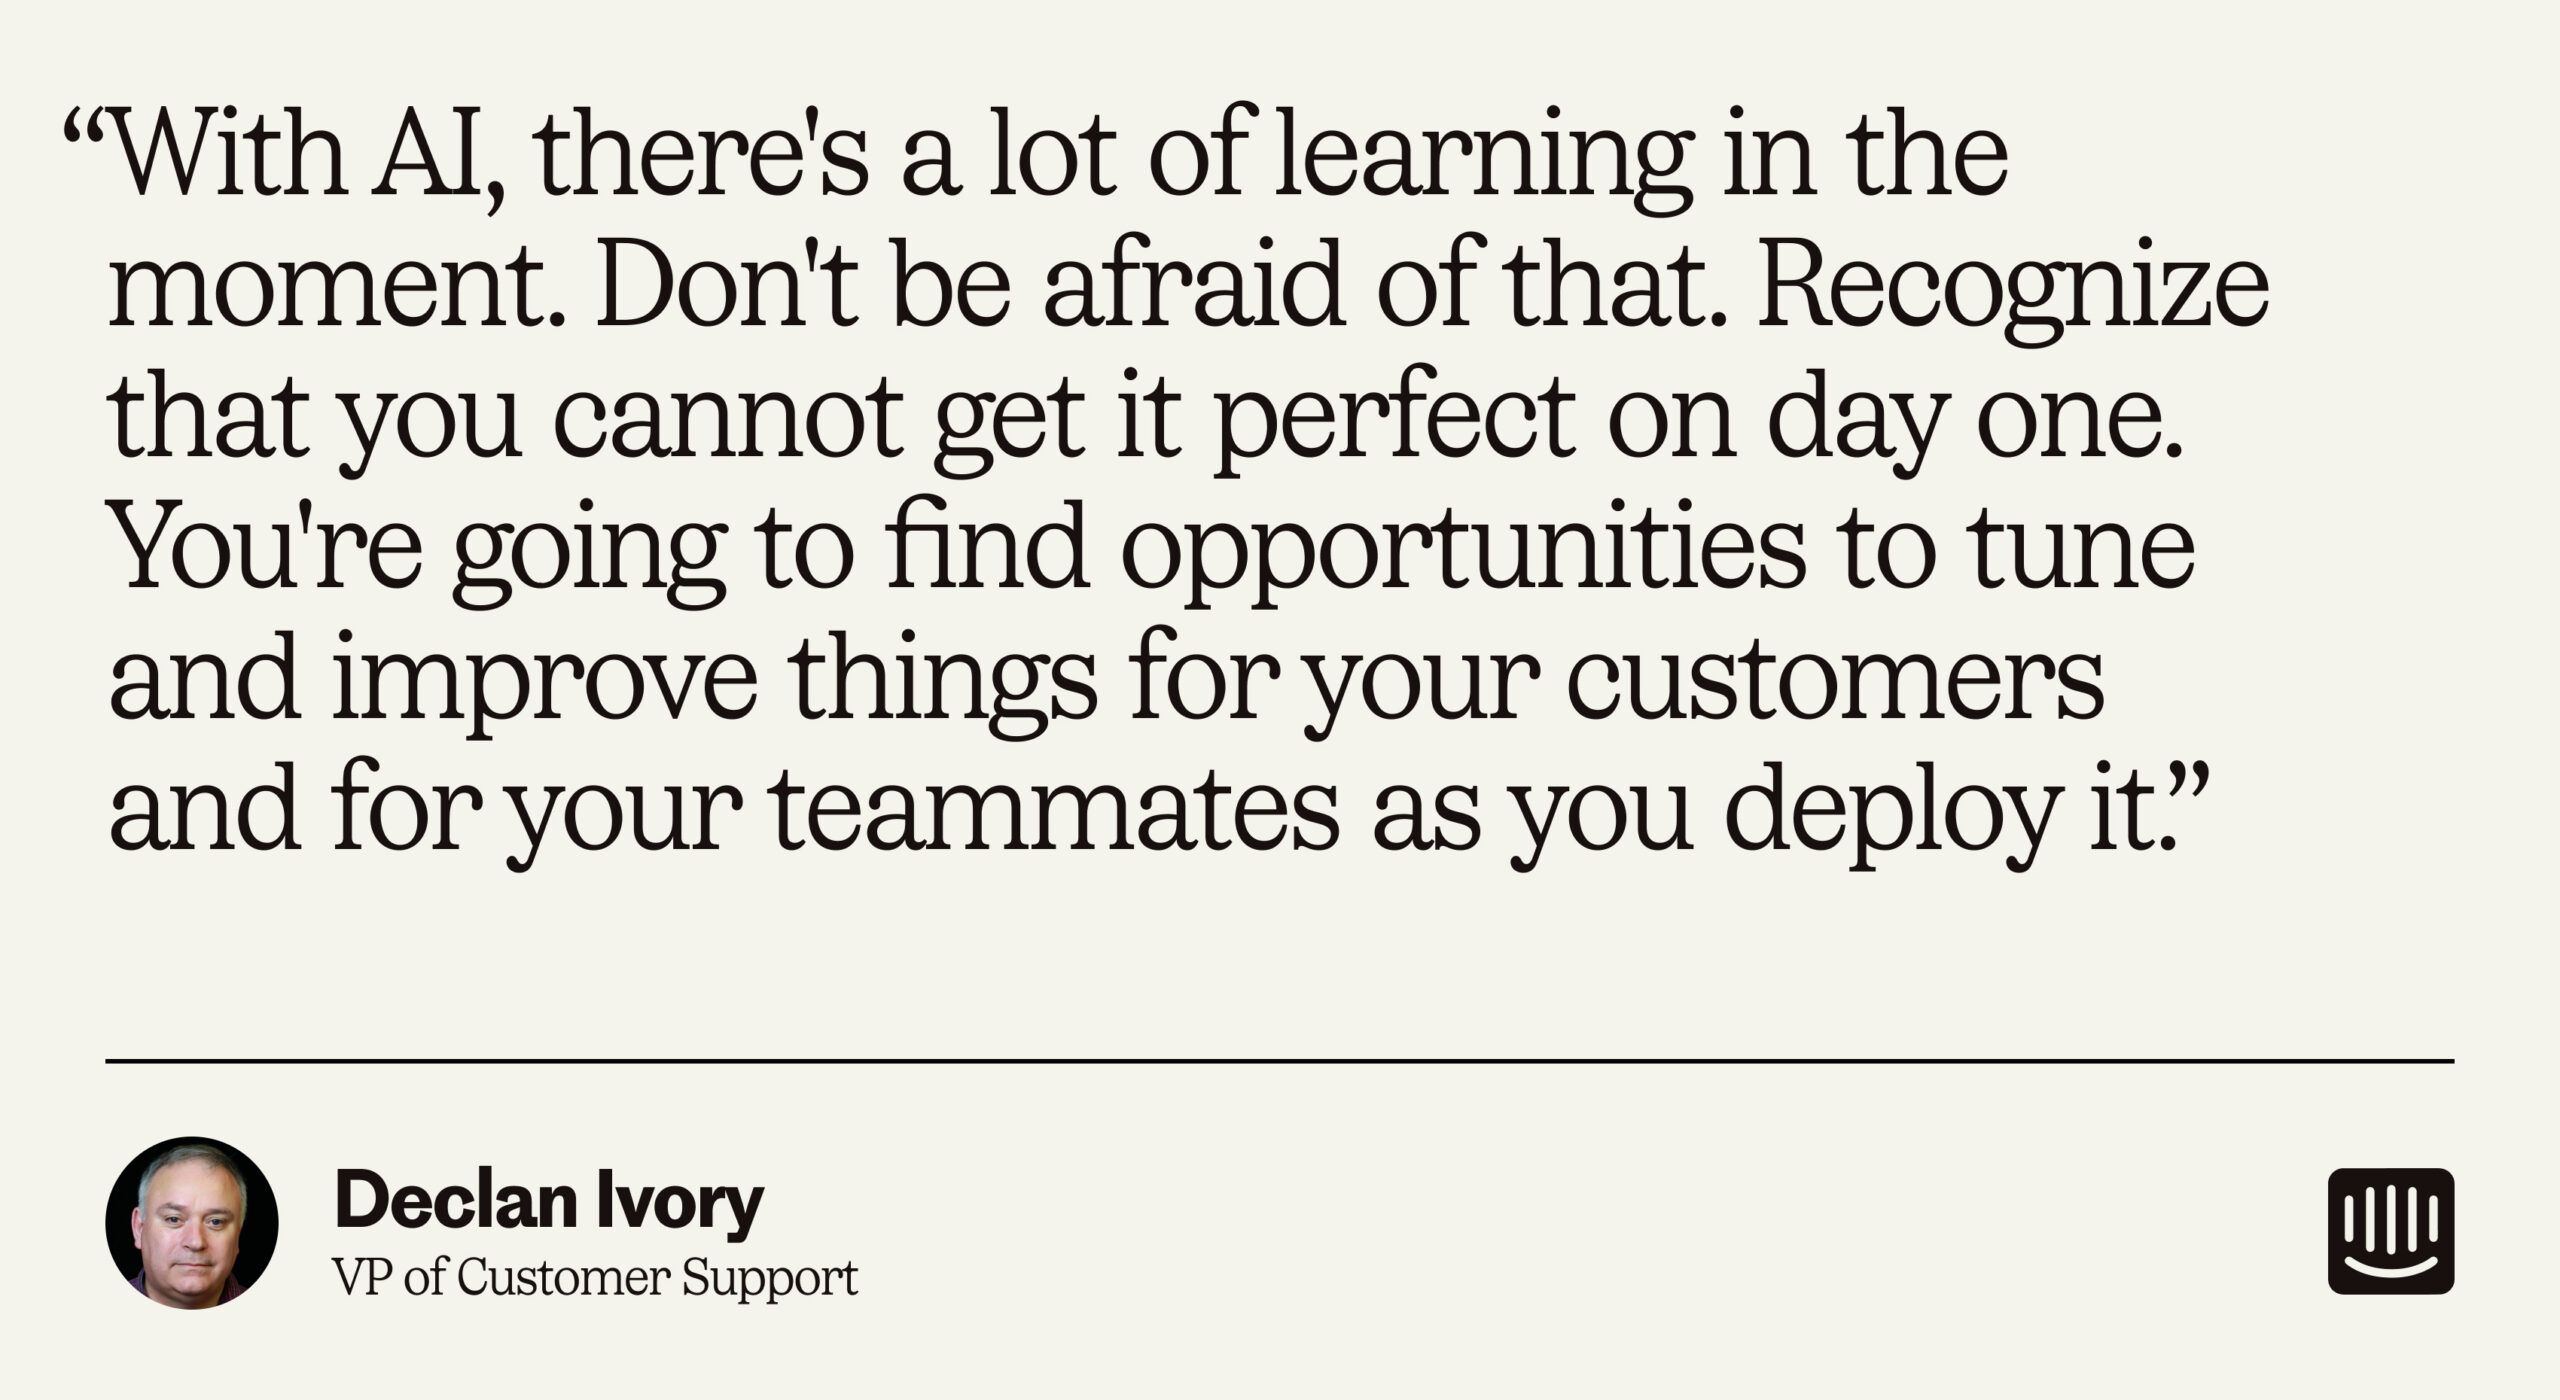 “With AI, there's a lot of learning in the moment. Don't be afraid of that. Recognize that you cannot get it perfect on day one. You're going to find opportunities to tune and improve things for your customers and for your teammates as you deploy it.” – Declan Ivory, VP of Customer Support at Intercom